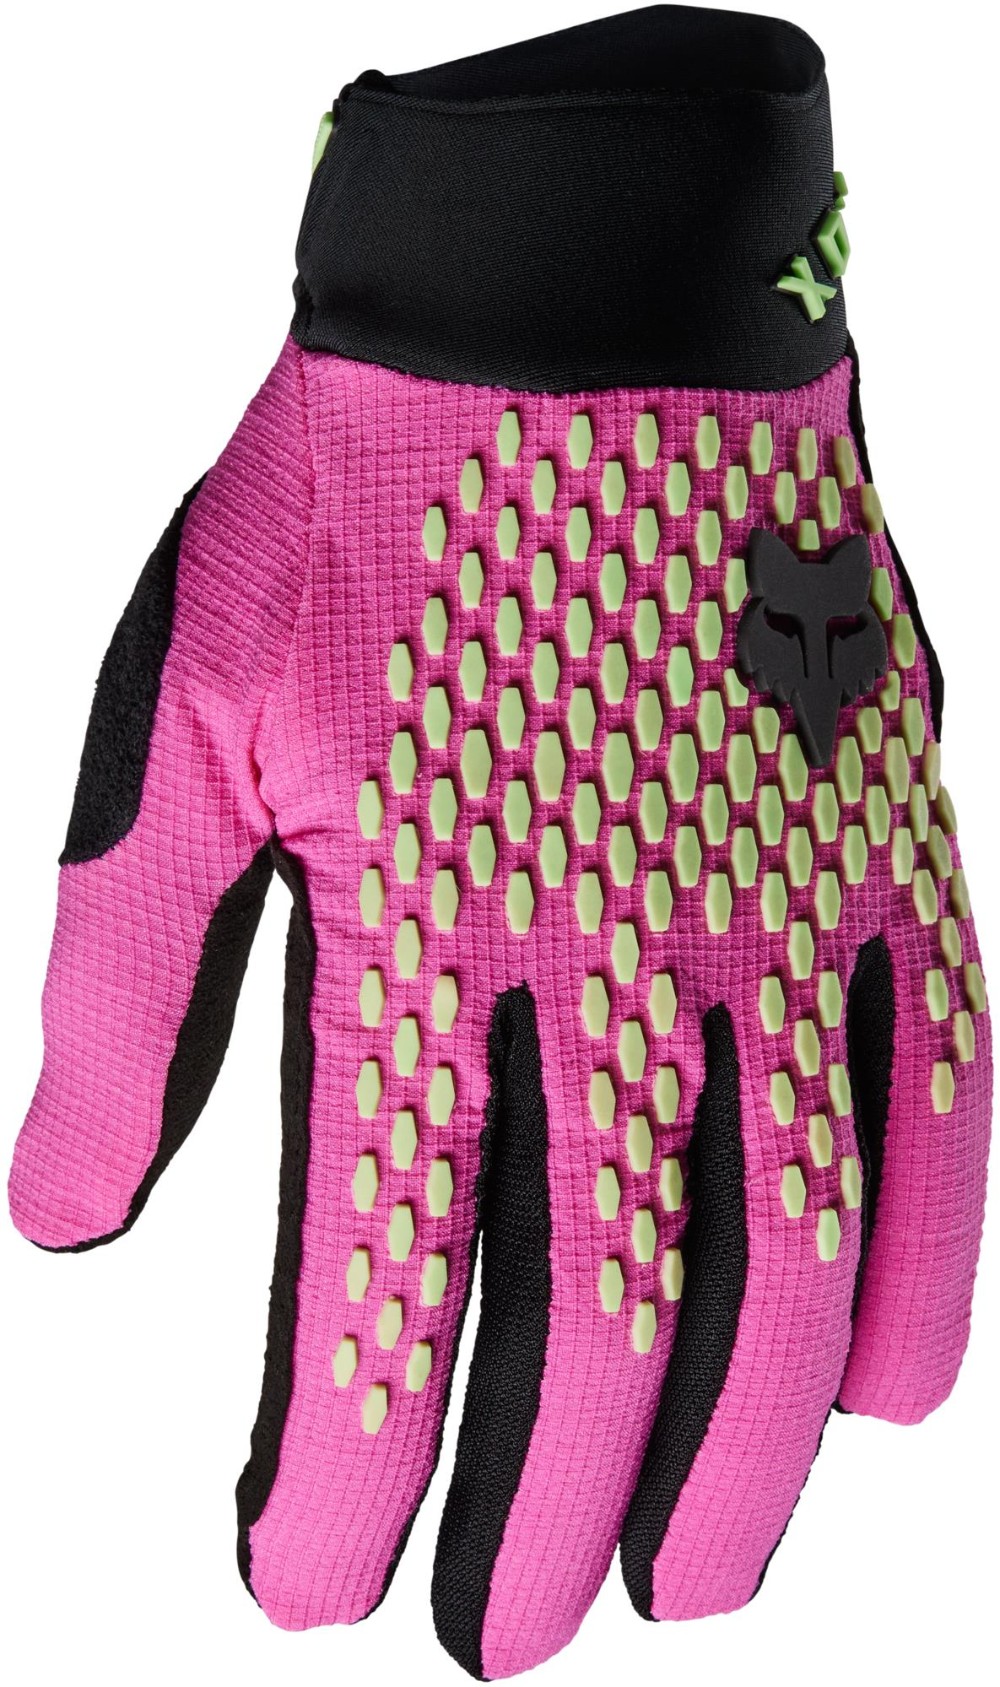 Defend Race Womens Long Finger Cycling Gloves image 0